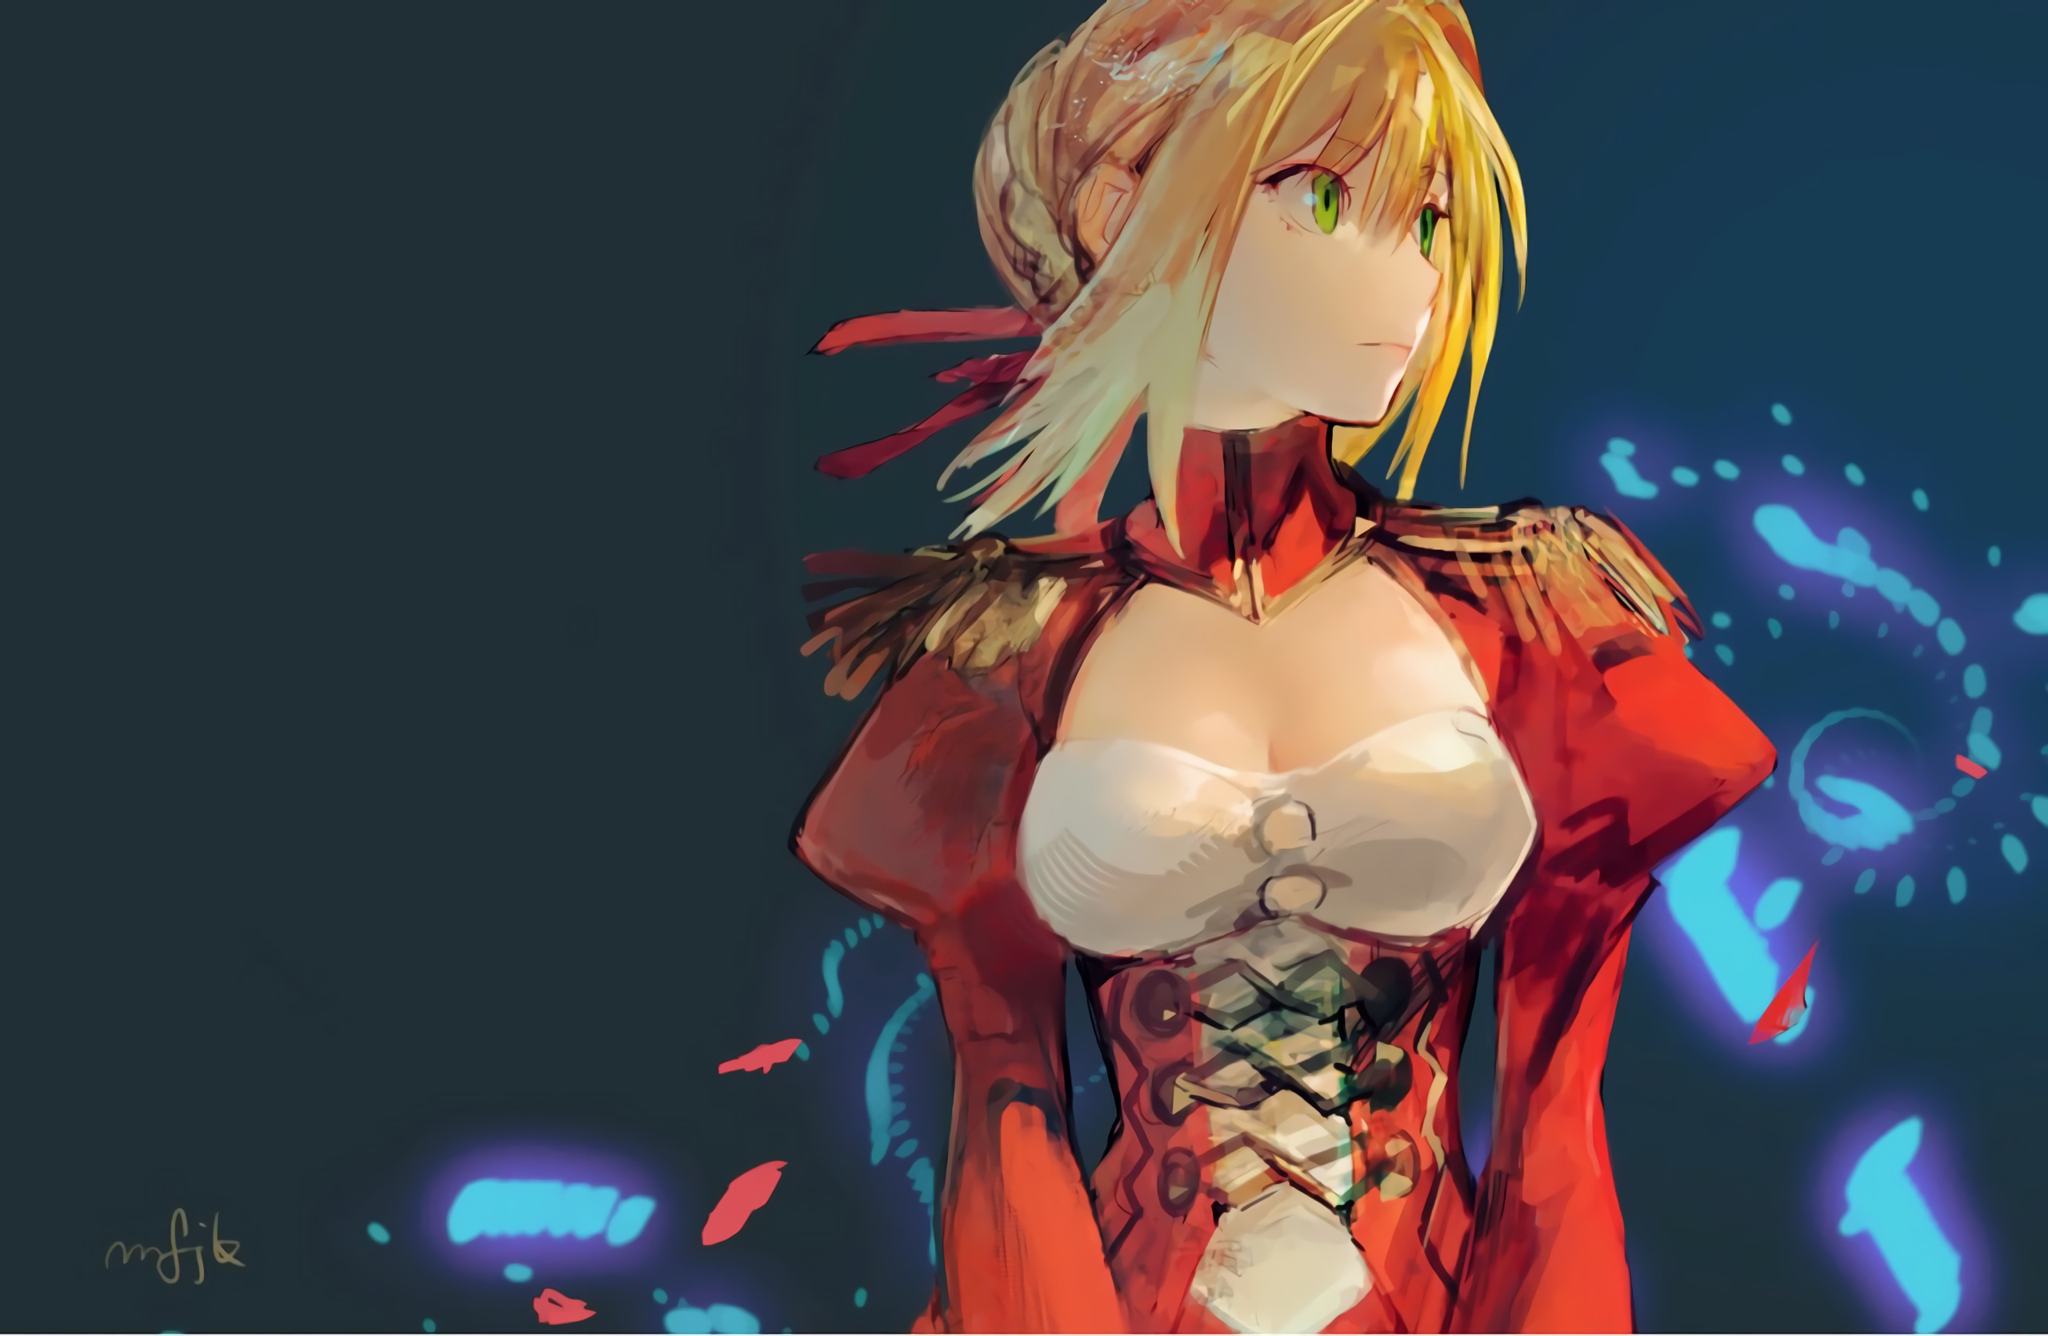 Anime 2048x1336 anime anime girls Fate/Extra Fate series Nero Claudius blonde green eyes dress fantasy art fantasy girl simple background red dress looking away